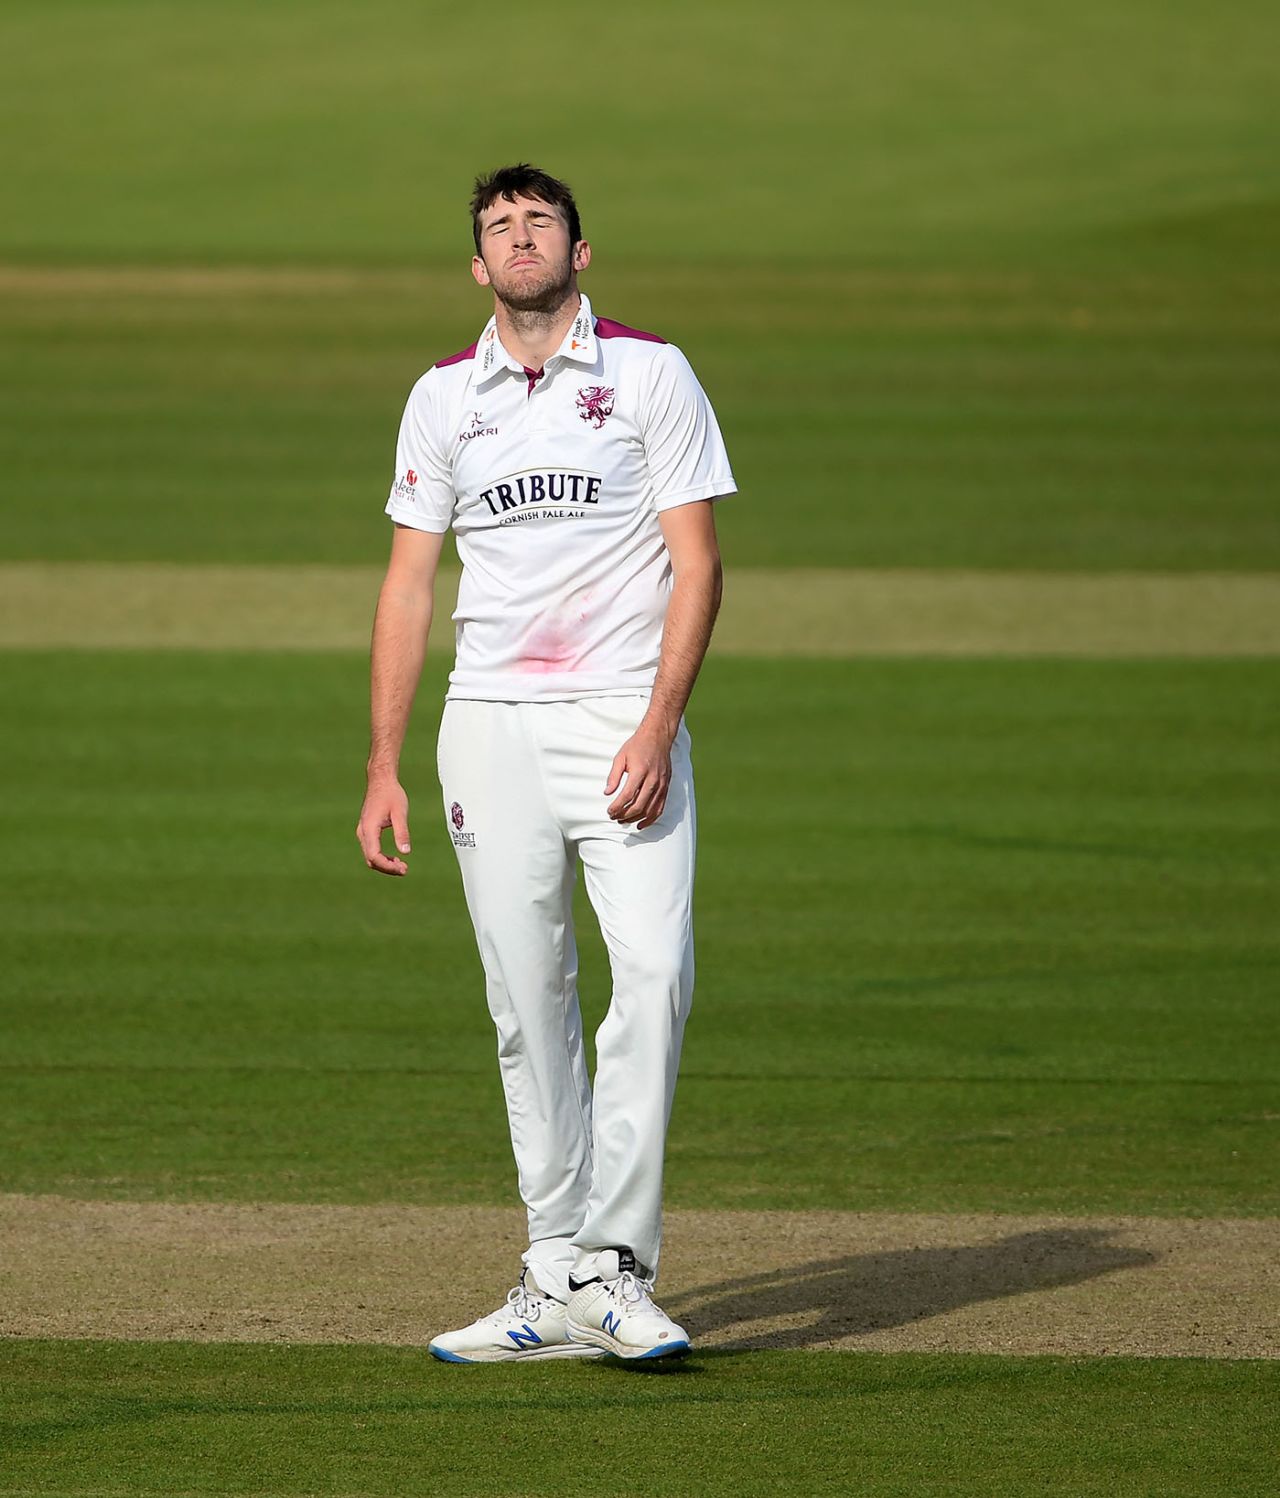 Craig Overton shows his frustration, Somerset vs Essex, Bob Willis Trophy final, 4th day, Lord's, September 26, 2020